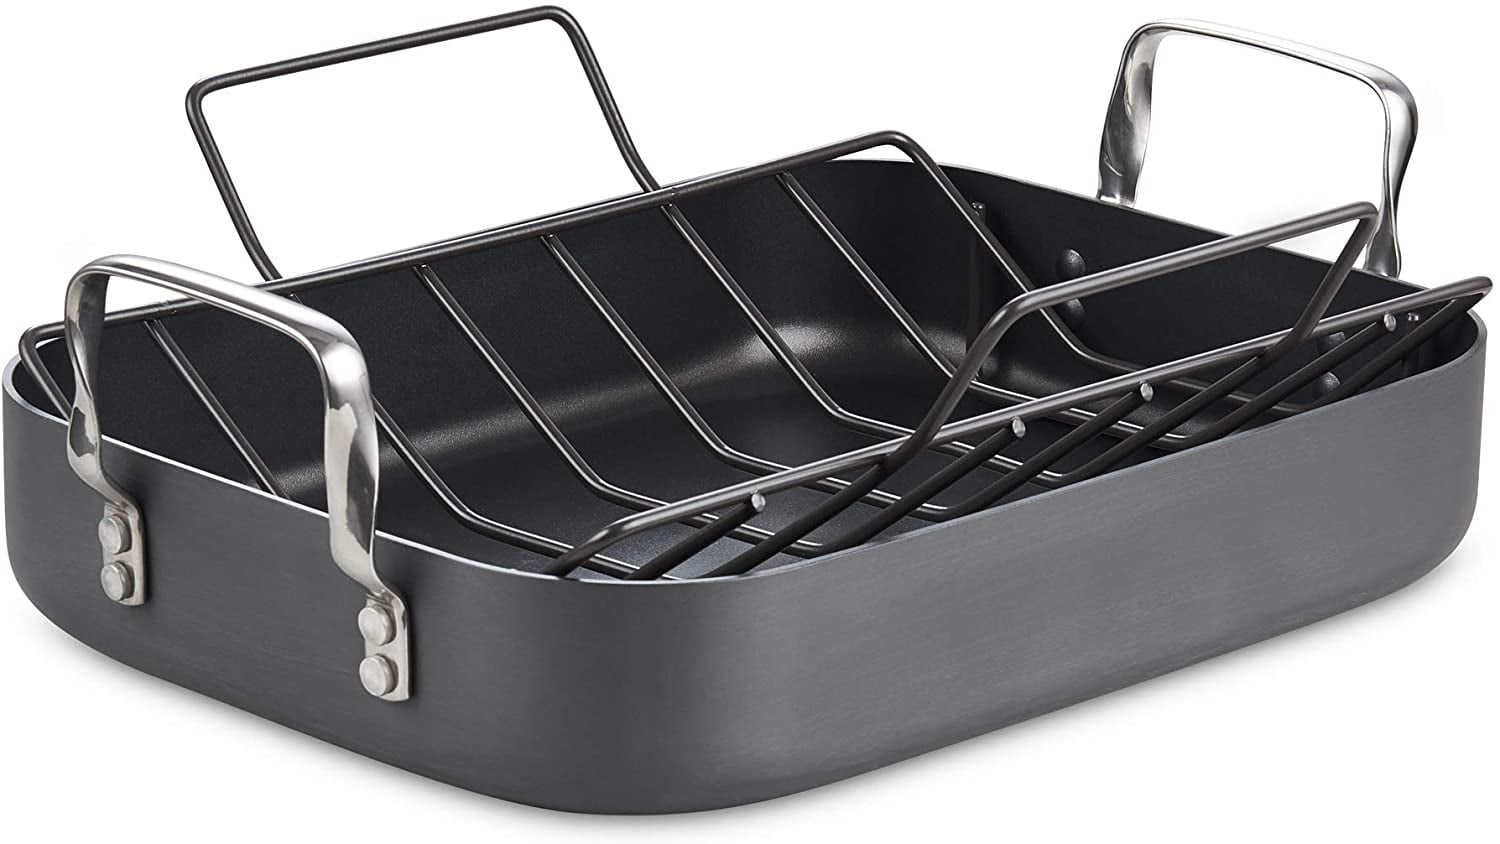 Cooks Standard Classic 02535 Stainless Steel Roaster with Rack, 16 